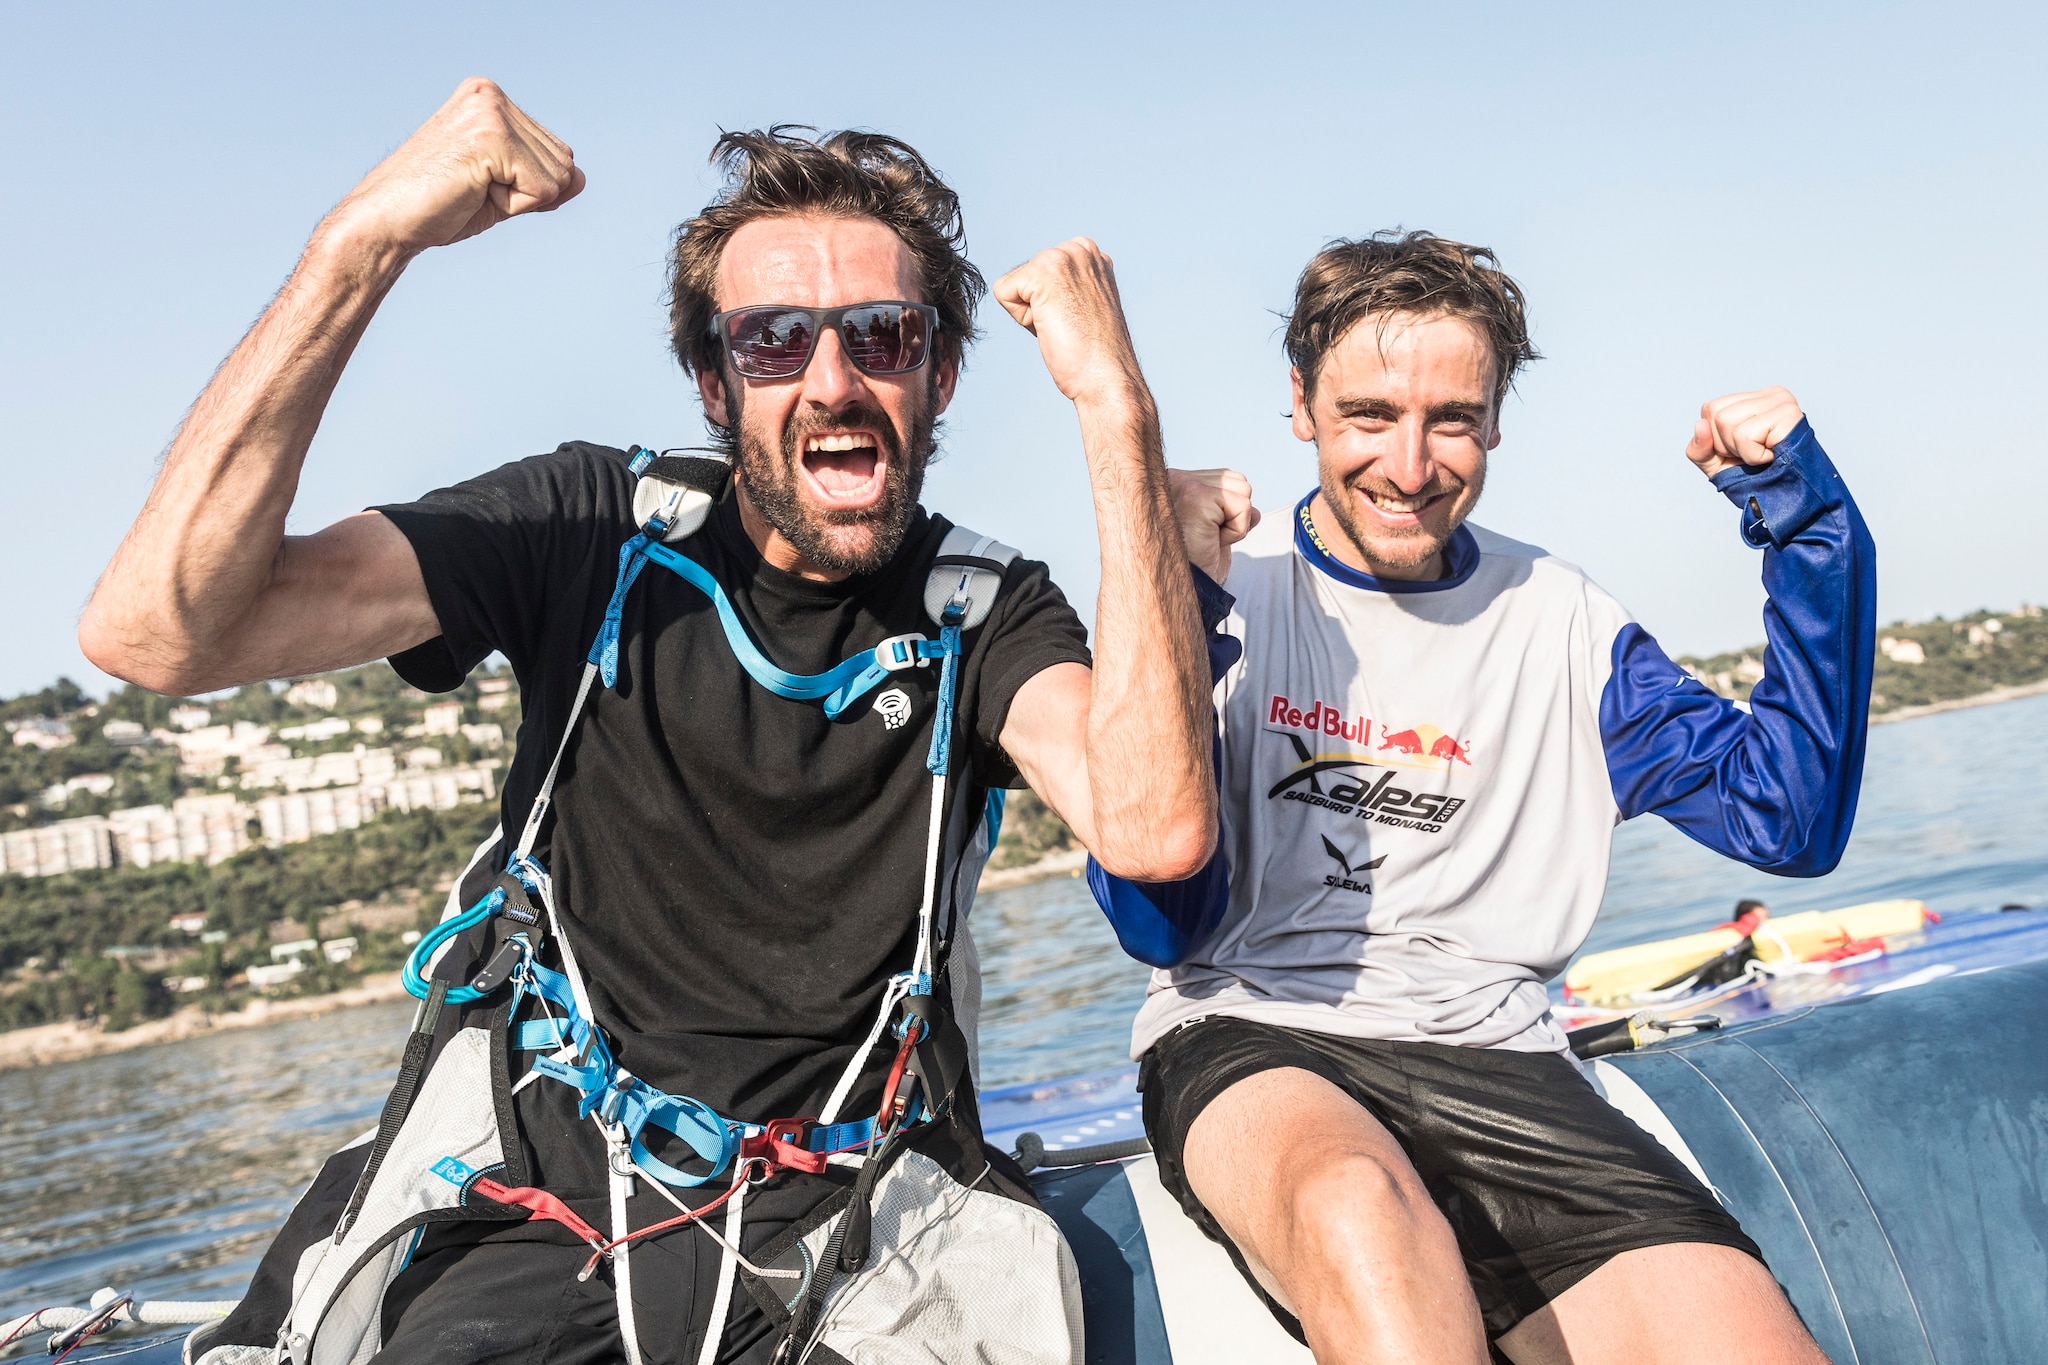 Maxime Pinots (FRA4) finishes the Red Bull X-Alps in Monaco, France on June 26, 2019